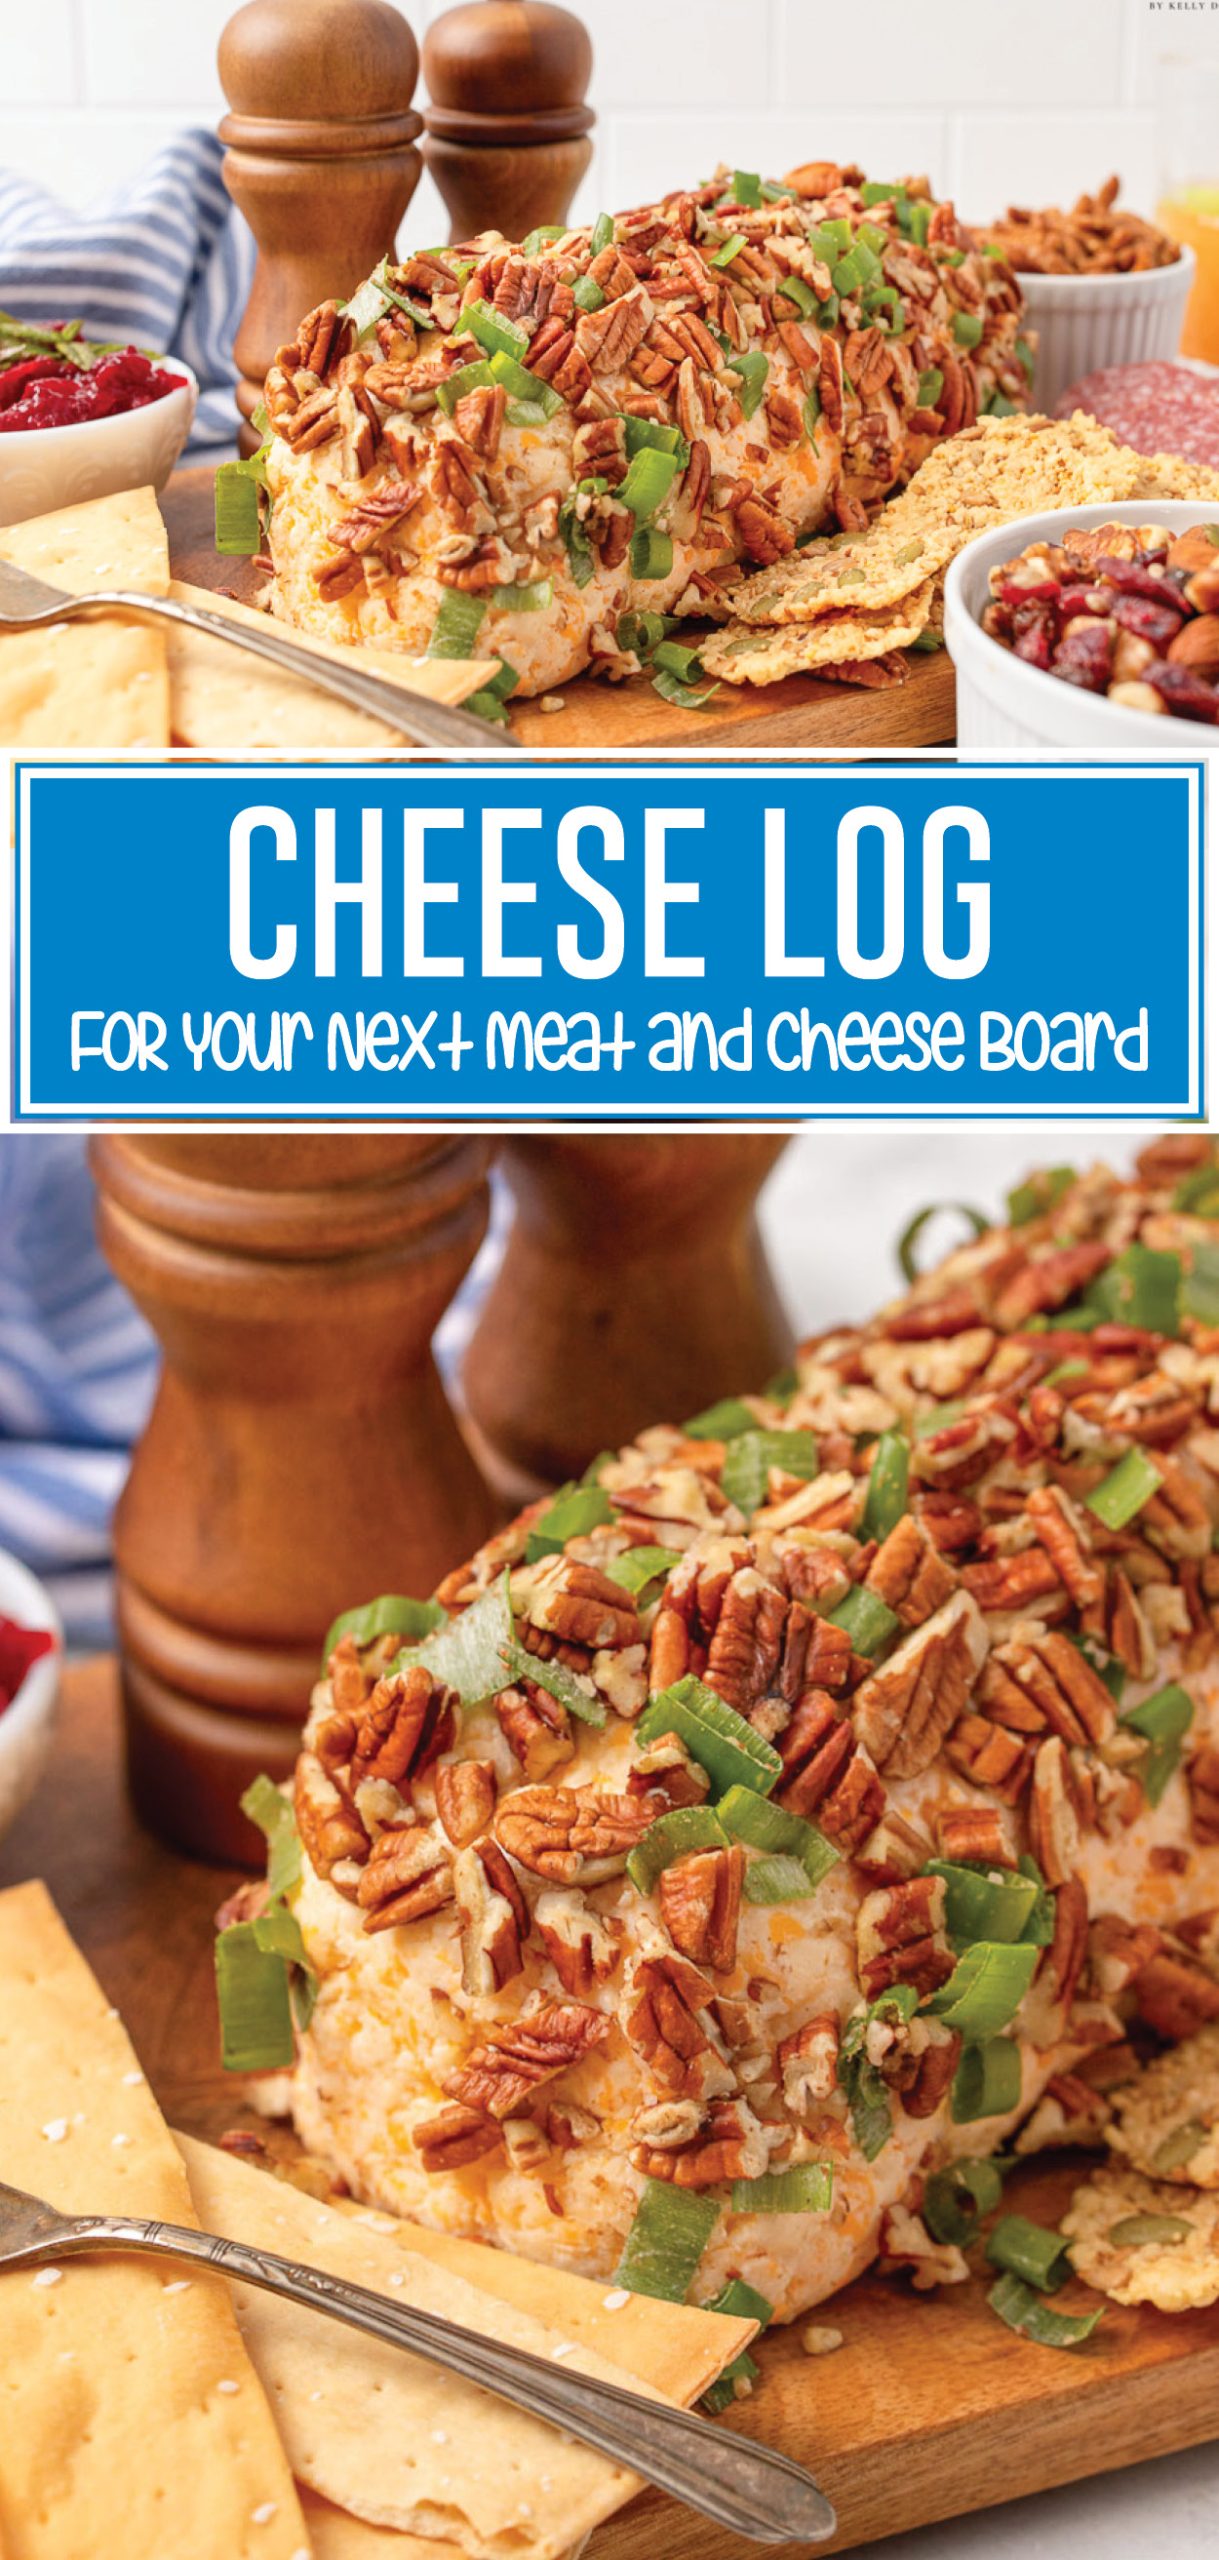 This is the perfect appetizer for all your special occasions and parties! Creamy Cheese Log is the EASIEST and most impressive appetizer! The prep is just about 15 minutes, or it can be prepared in advance and refrigerated. Awesome retro addition to modern meat and cheese boards!